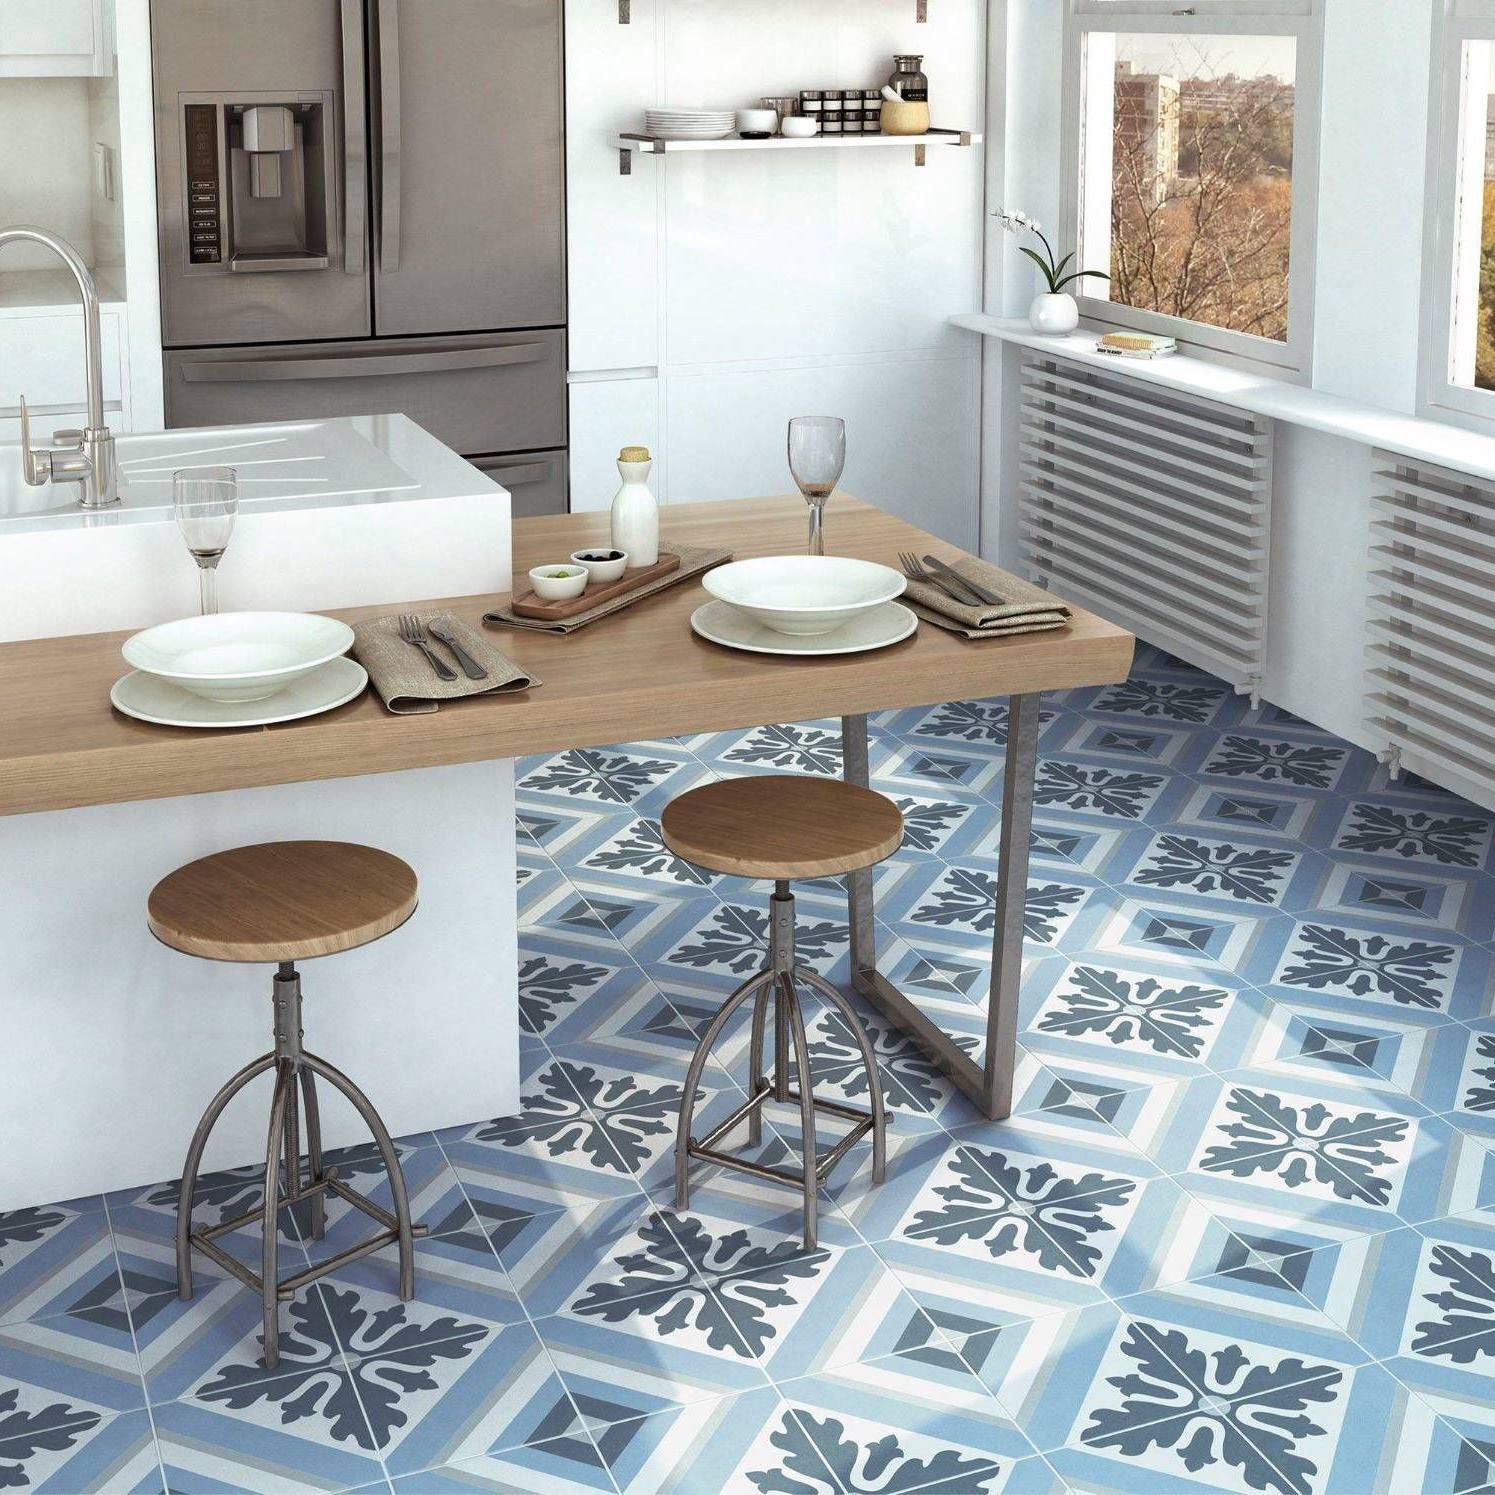 Cuban_Heritage_10_G | Stones & More | Finest selection of Mosaics, Glass, Tile and Stone